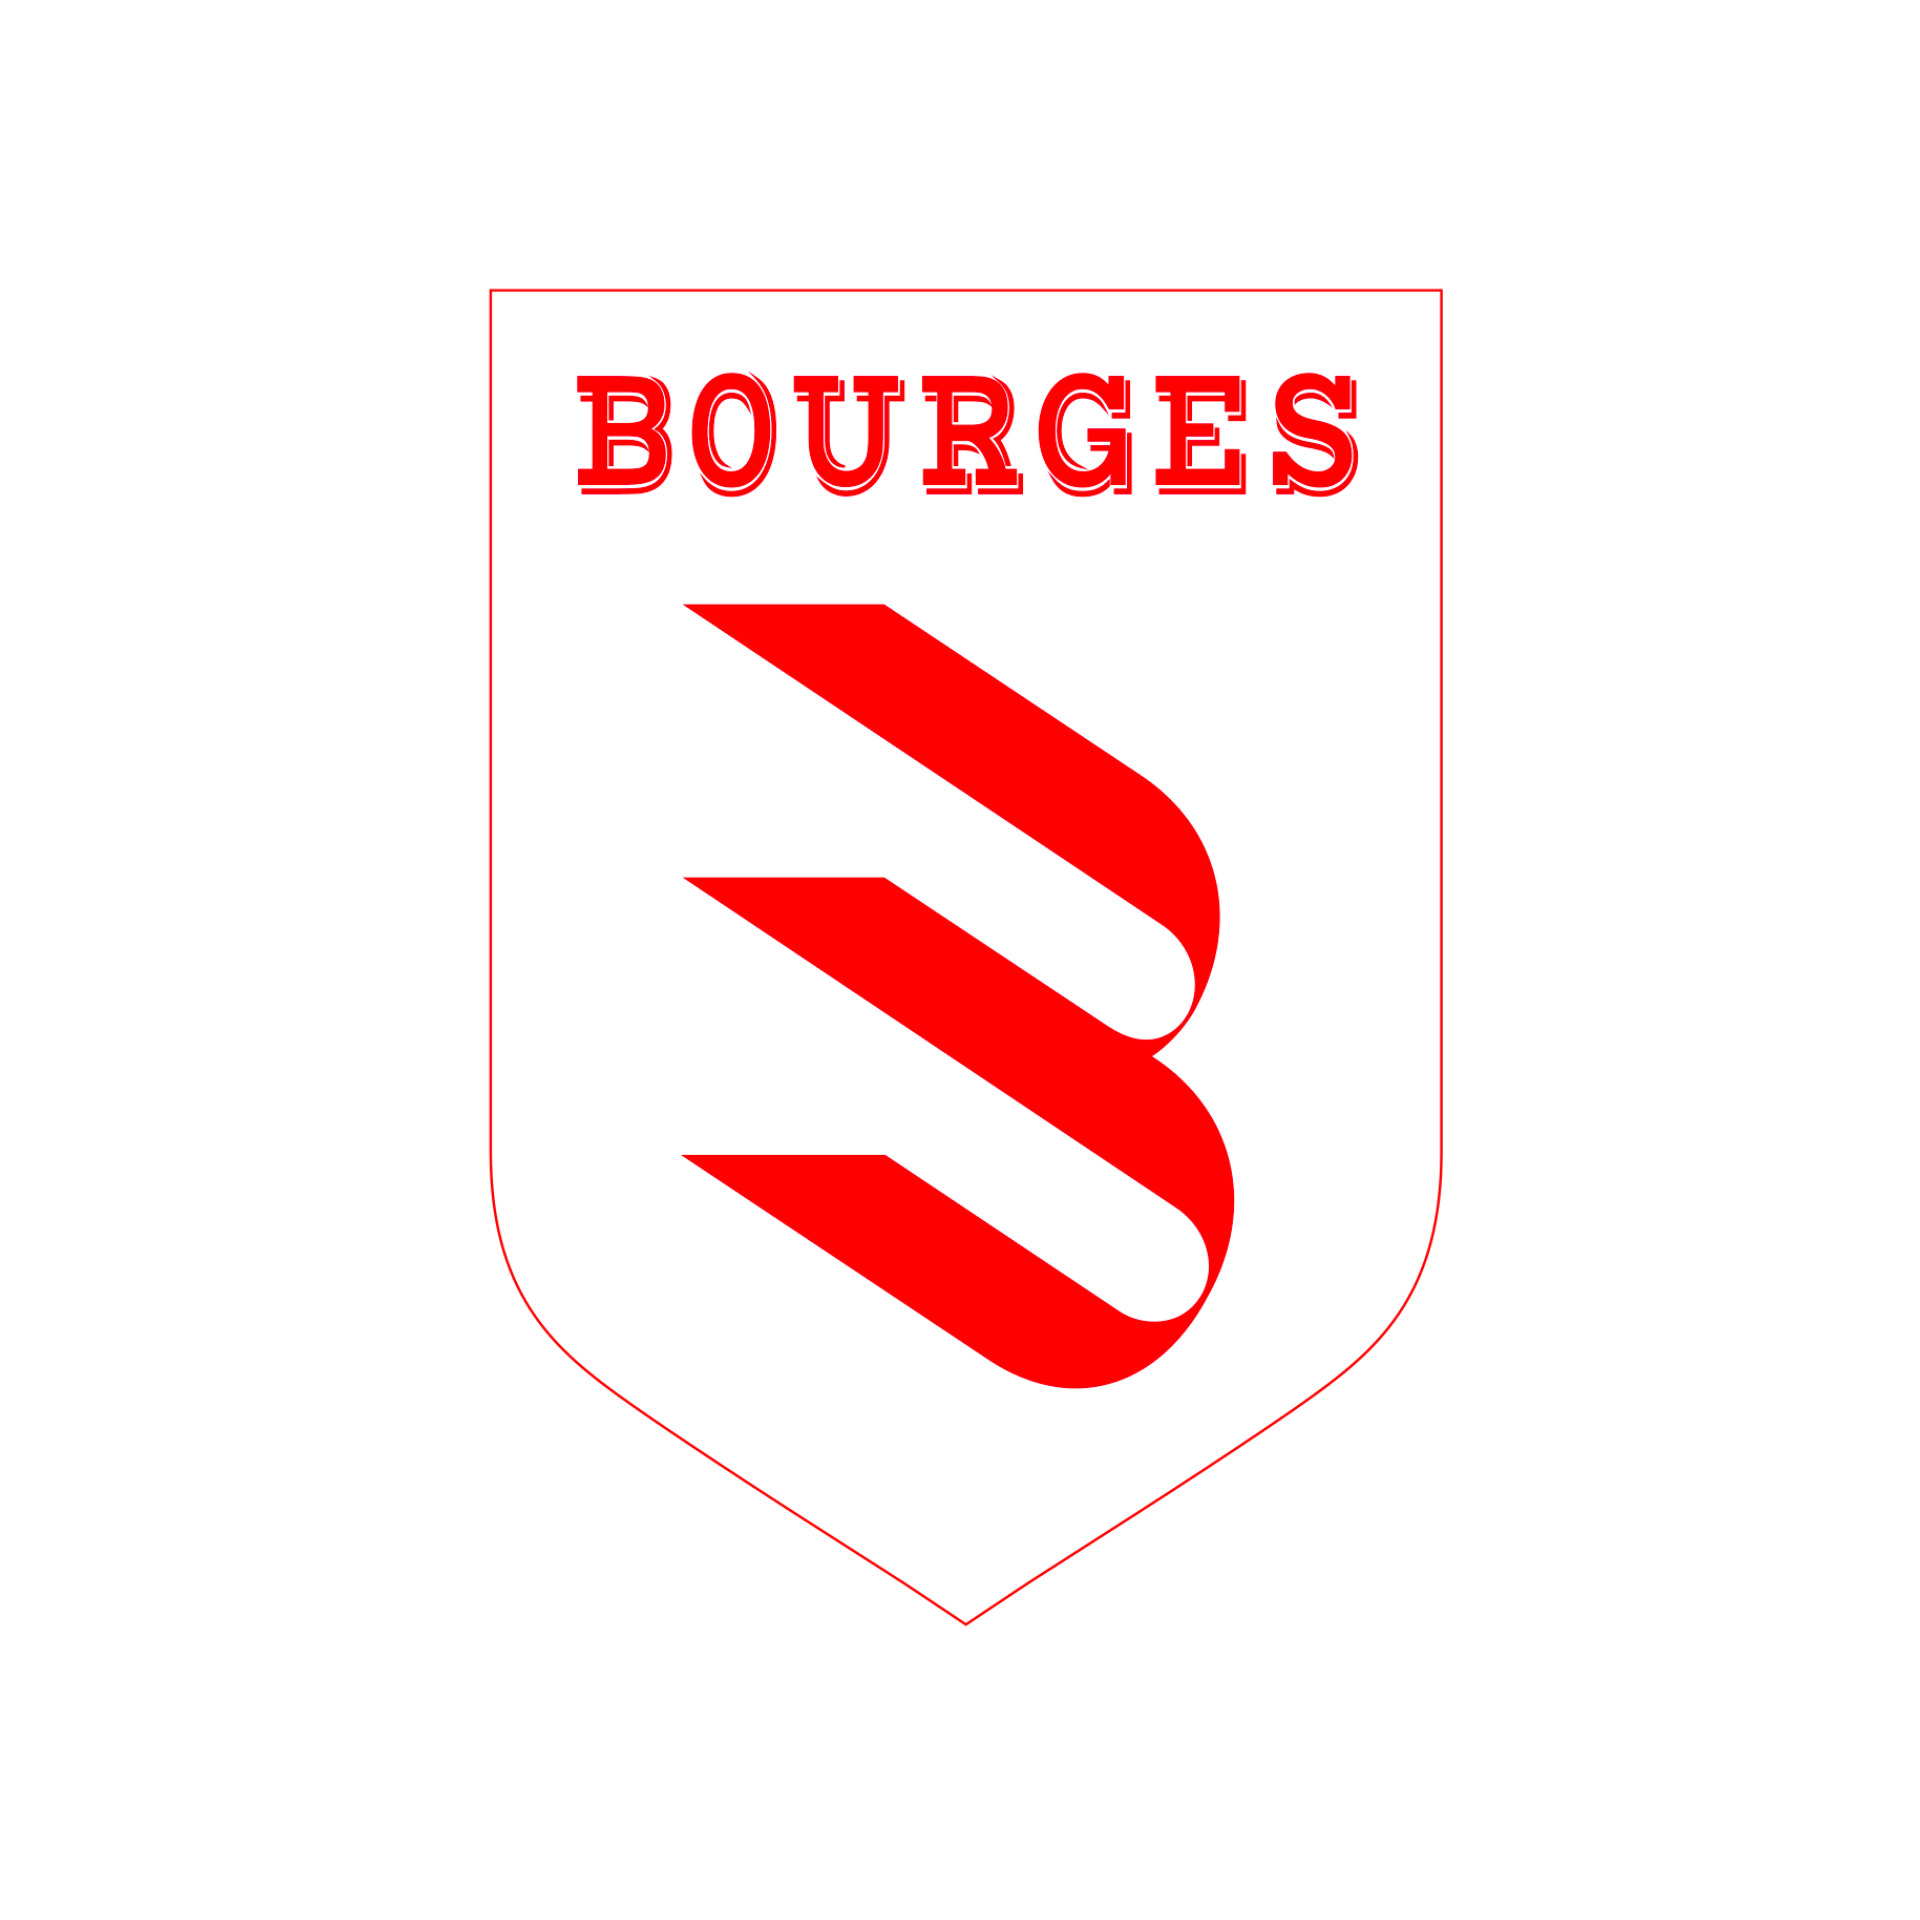 Bourges Foot: 18 Football Club Facts - Facts.net